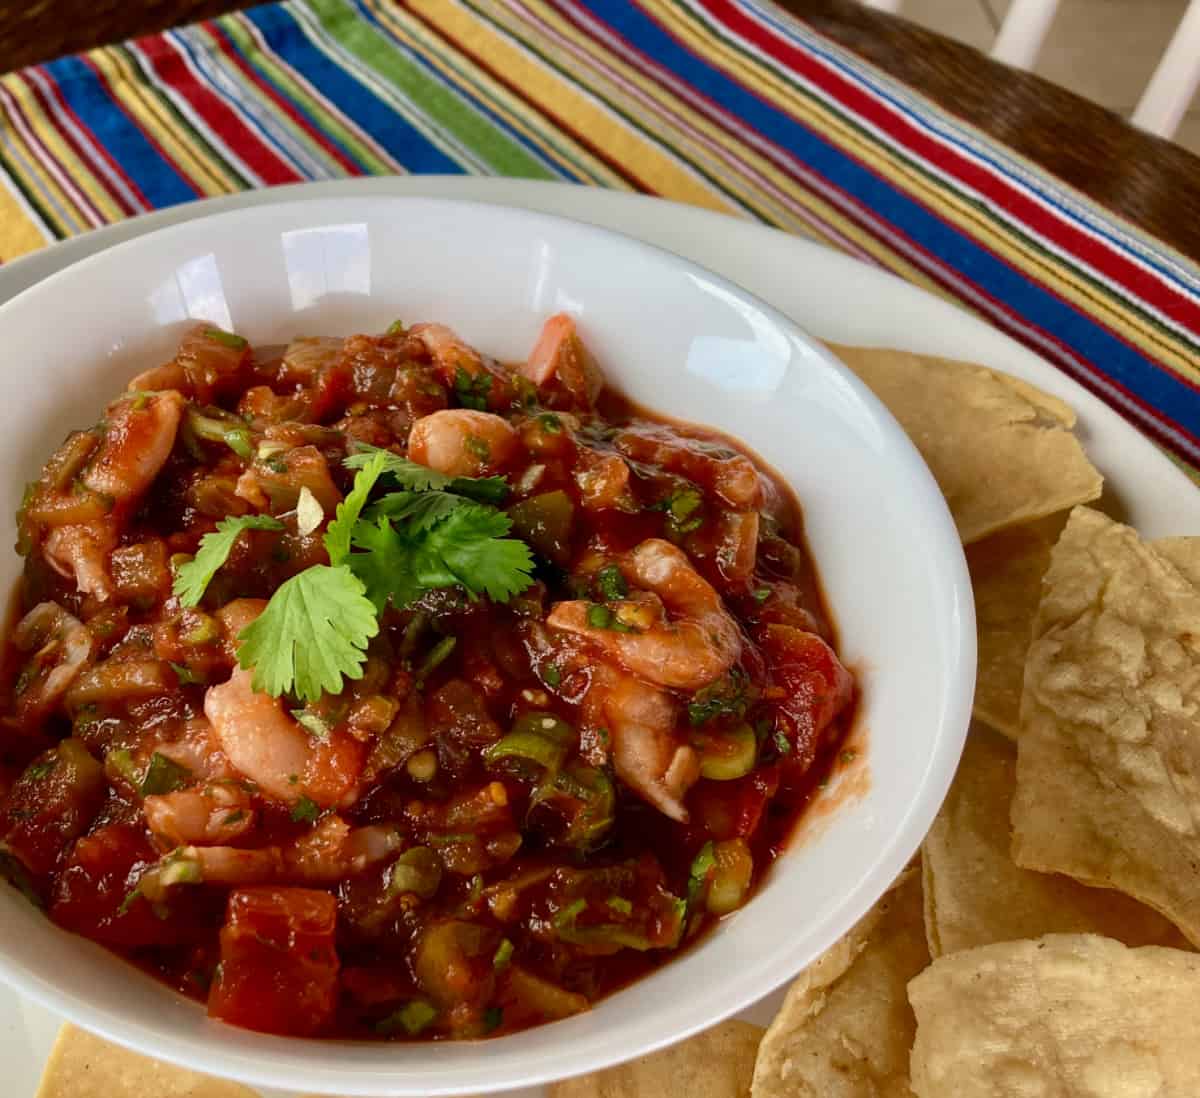 Shrimp Salsa Garnished with Cilantro White Bowl Surrounded by Tortilla Chips on Colorful Striped Mat.